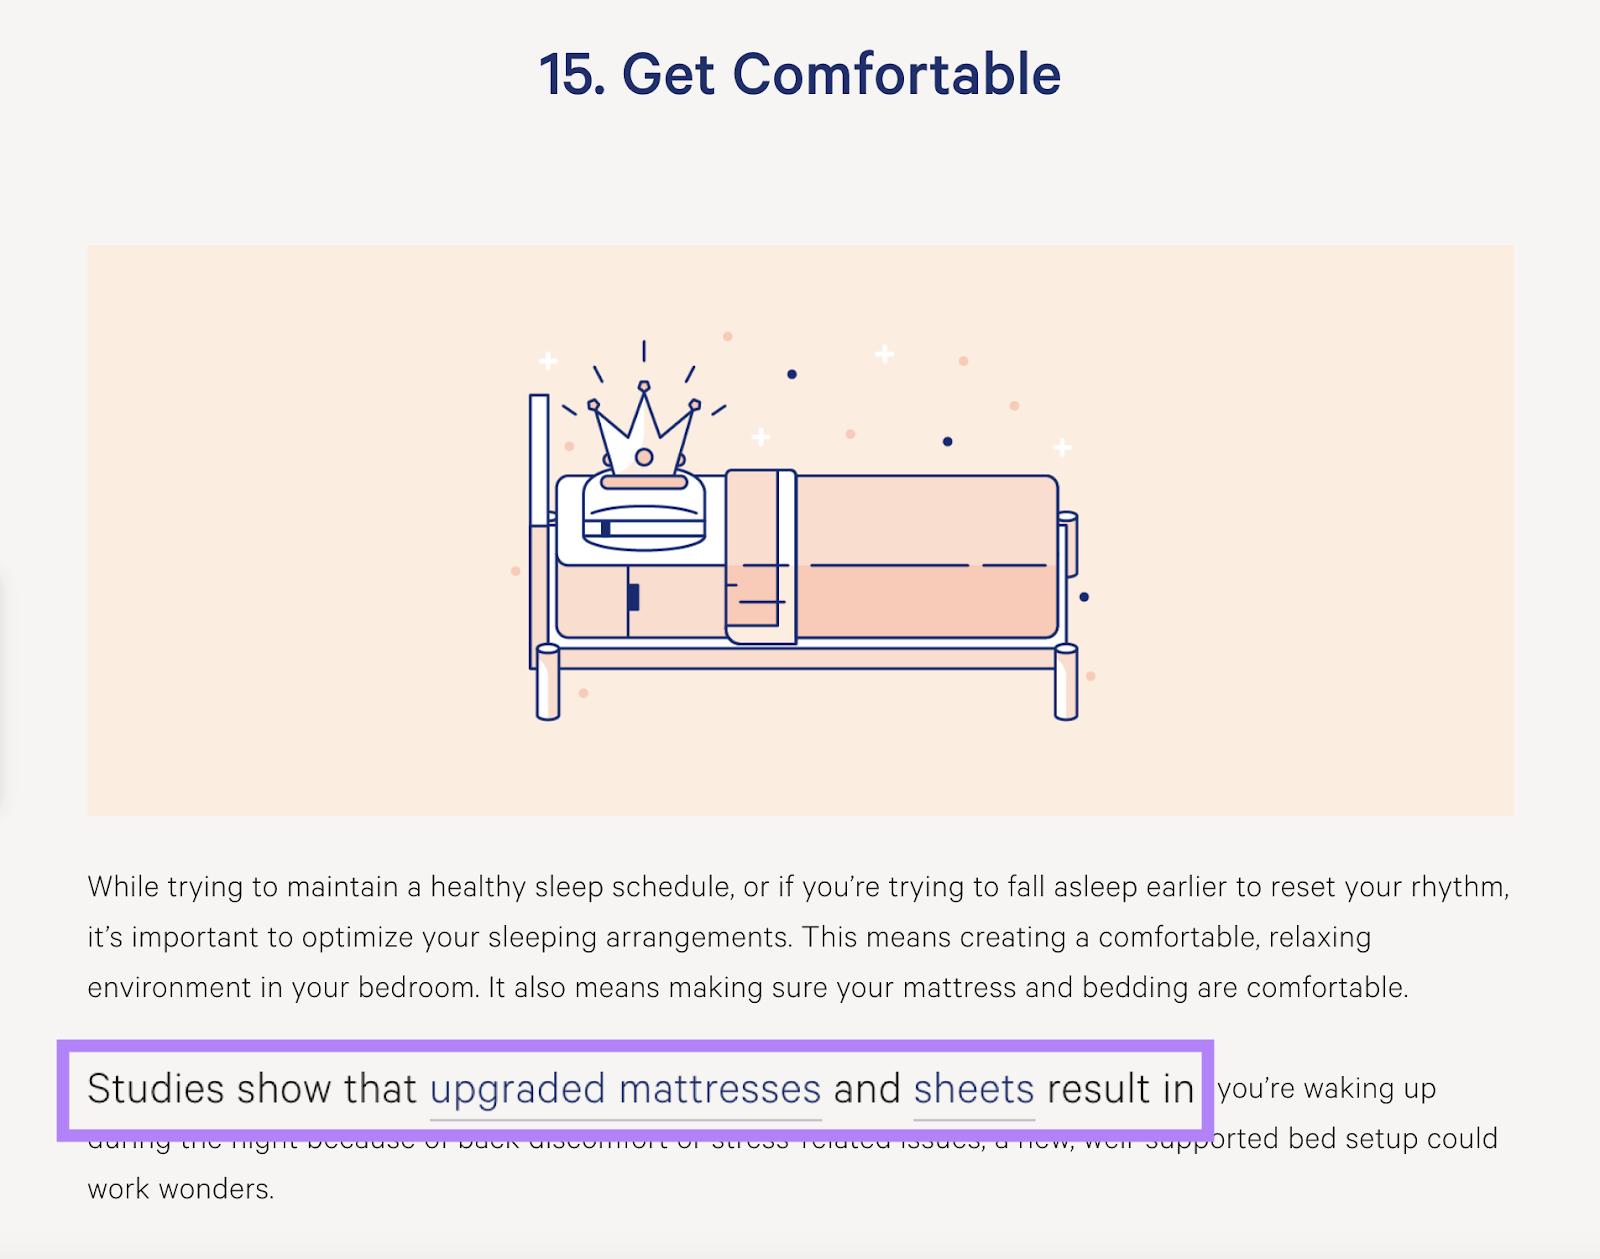 Casper shares data-backed tips successful  their nonfiction  connected  slumber  schedule